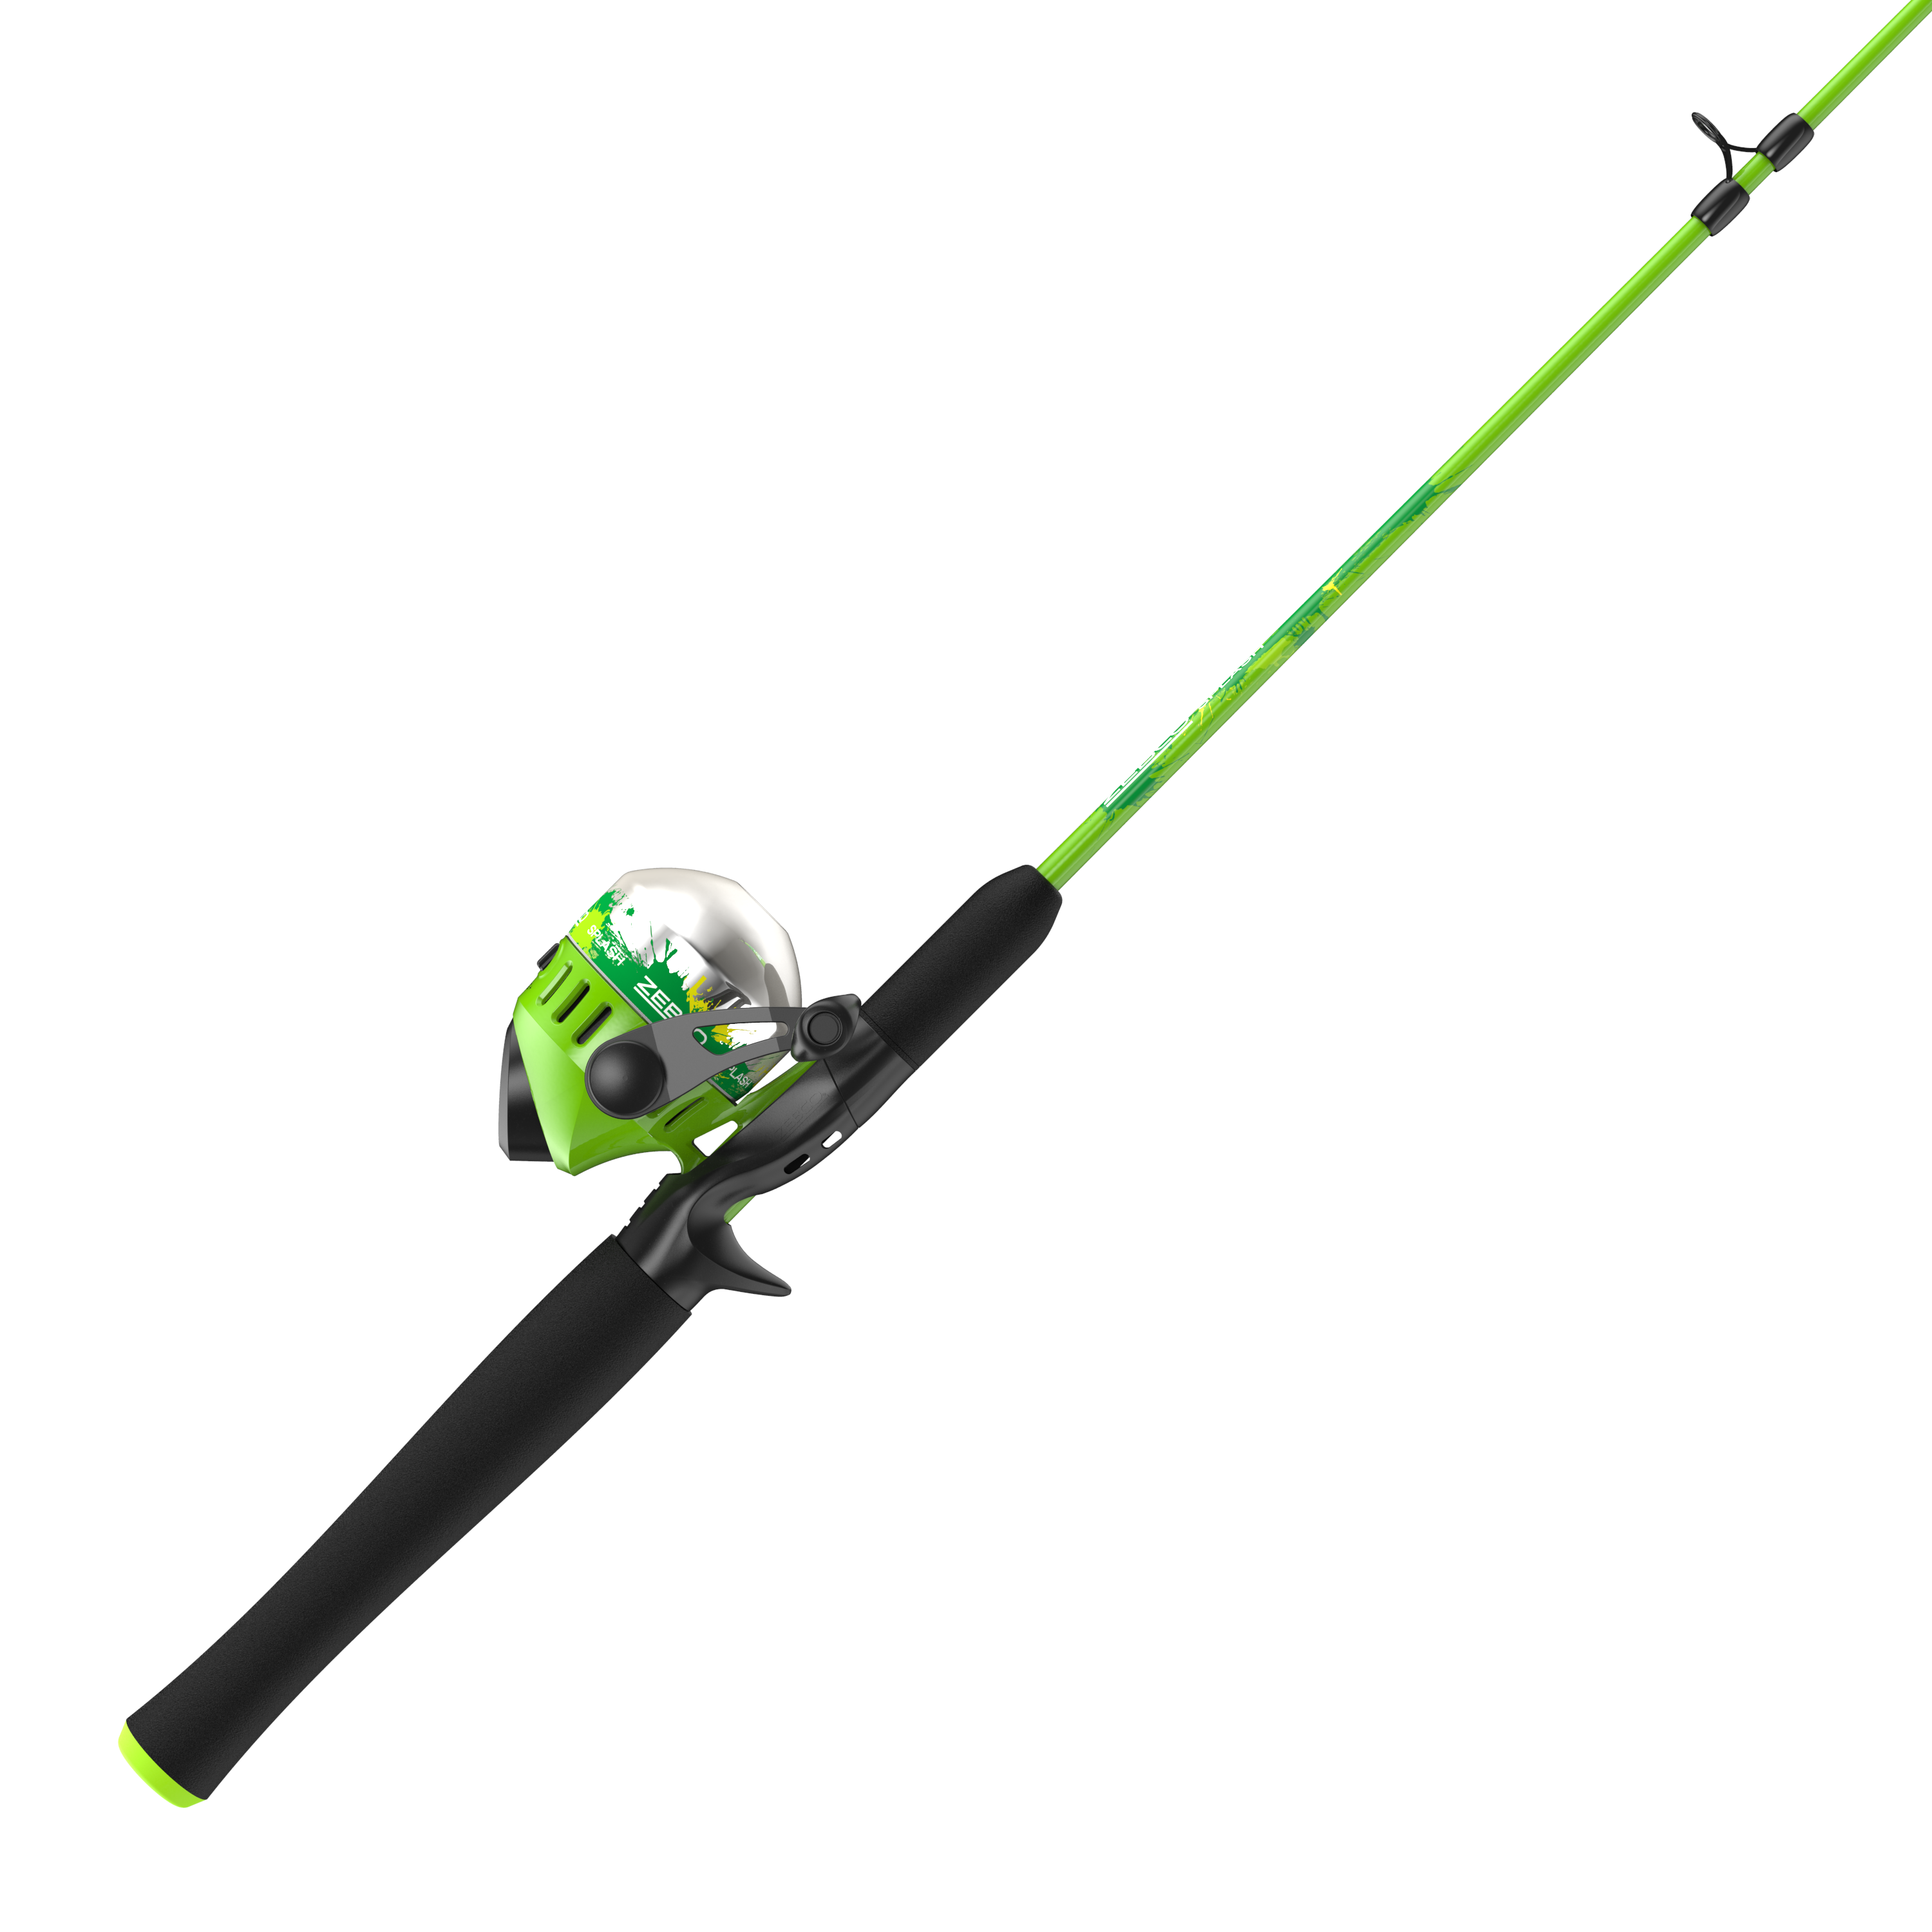  Zebco Kids Splash Floating Spincast Reel and Fishing Rod  Combo, 29-Inch 1-Piece Fishing Pole, Size 20 Reel, Right-Hand Retrieve,  Pre-Spooled with 6-Pound Cajun Line, Blue : Sports & Outdoors